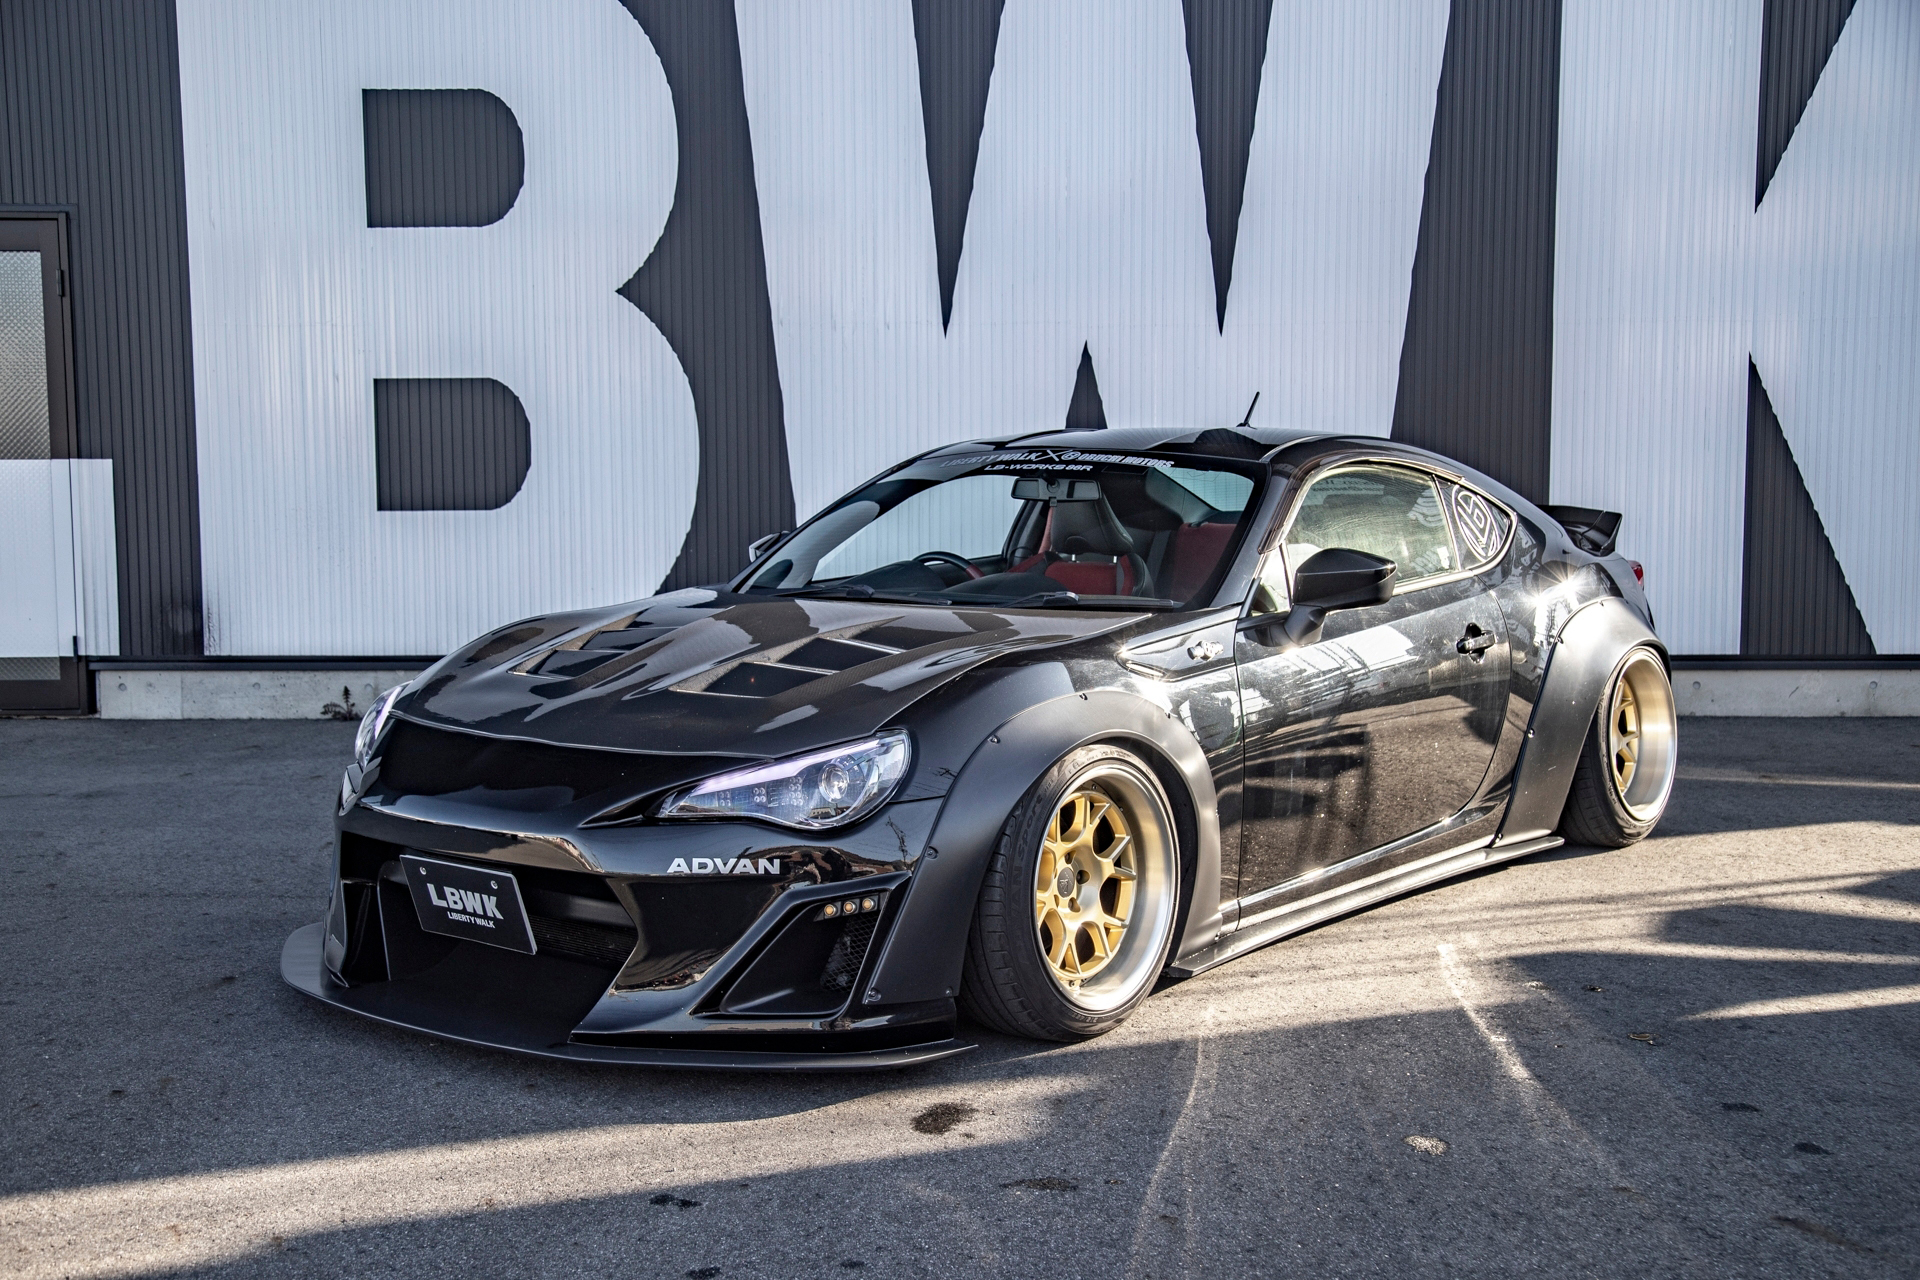 LB-WORKS86 1/18 リバティウォーク